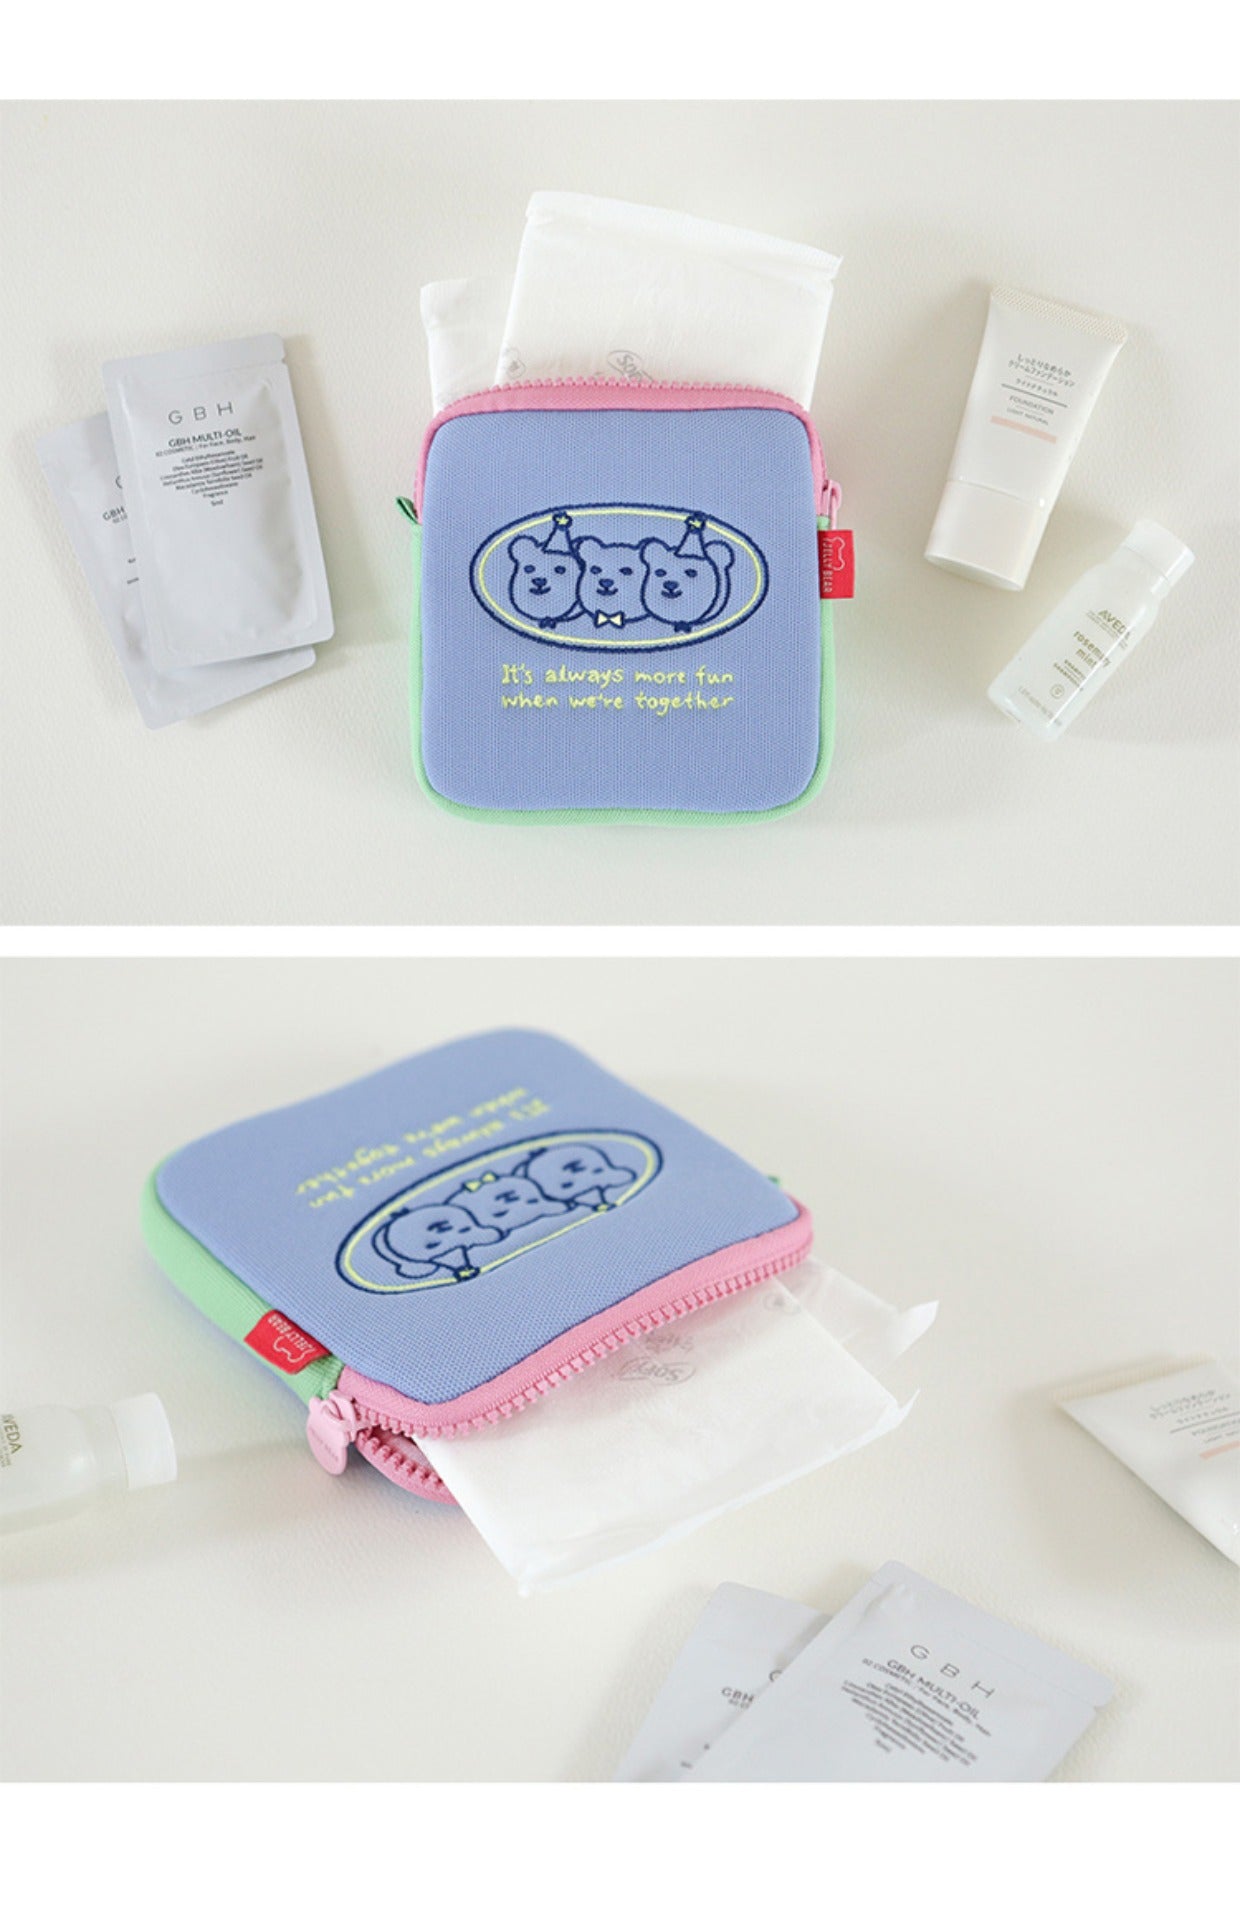 Dailylike KR - Together, Young & Free! Embroidered Cosmetic Storage Bag